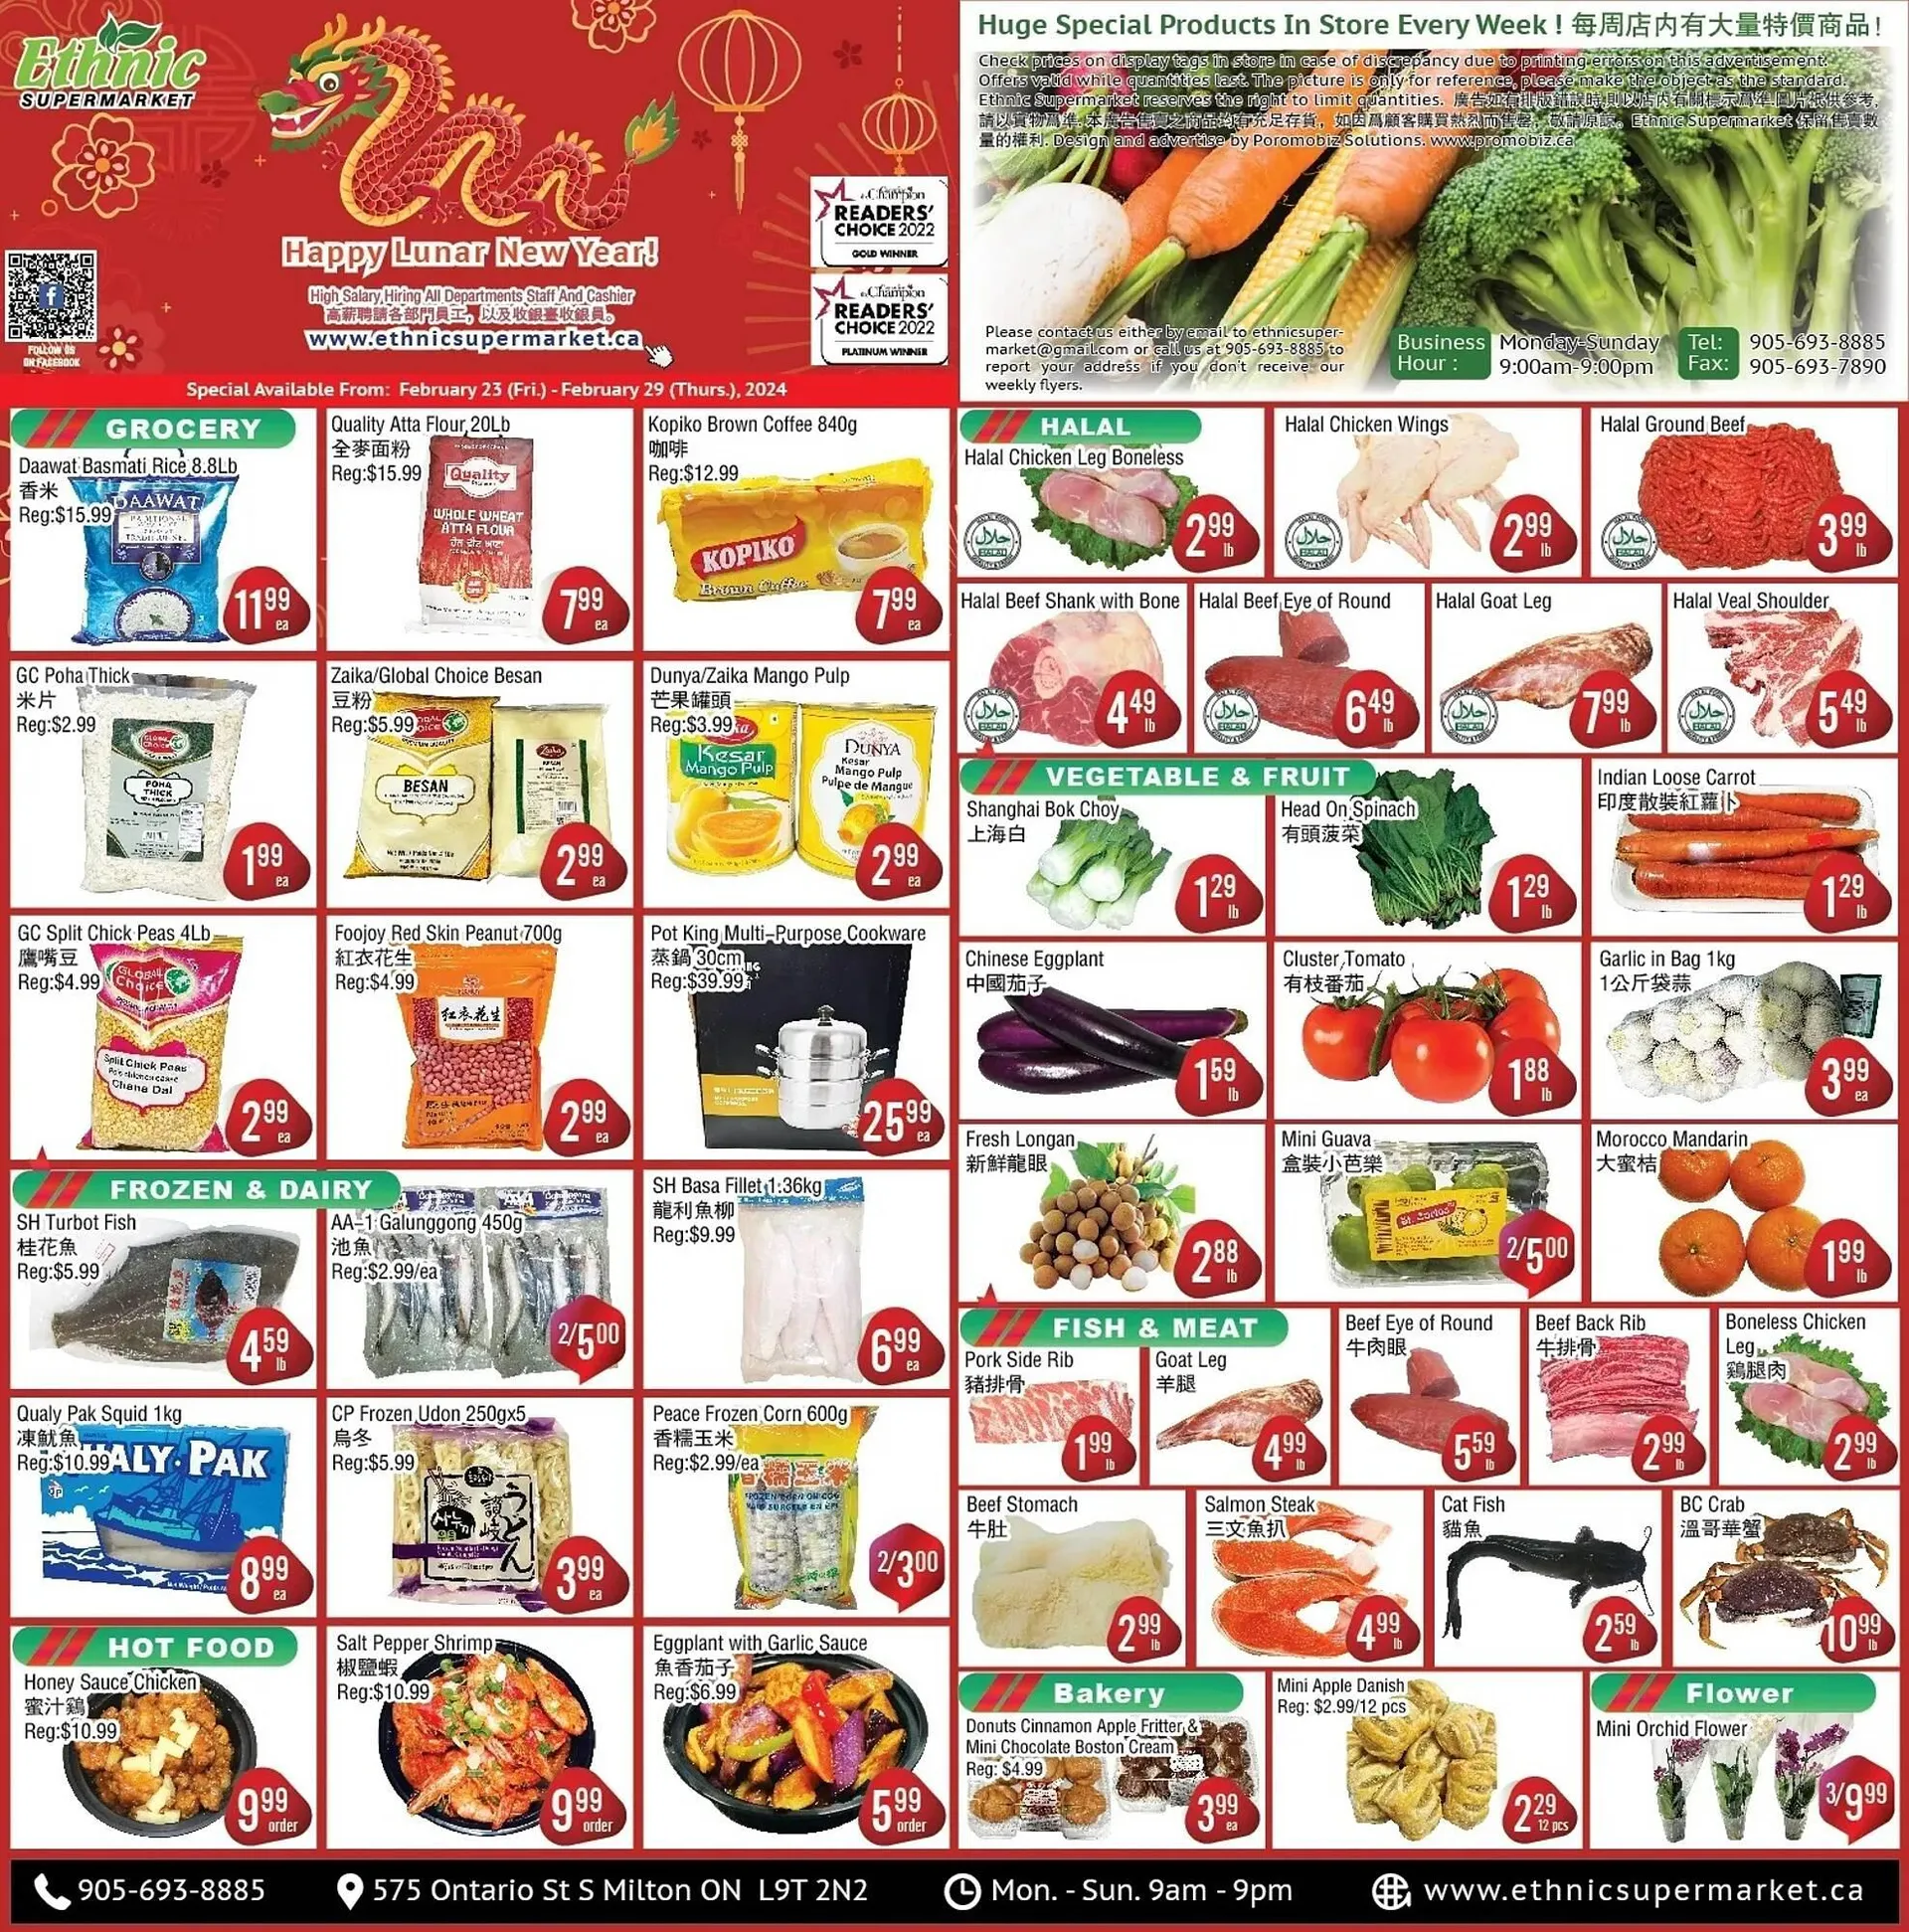 Ethnic Supermarket flyer from February 23 to February 29 2024 - flyer page 